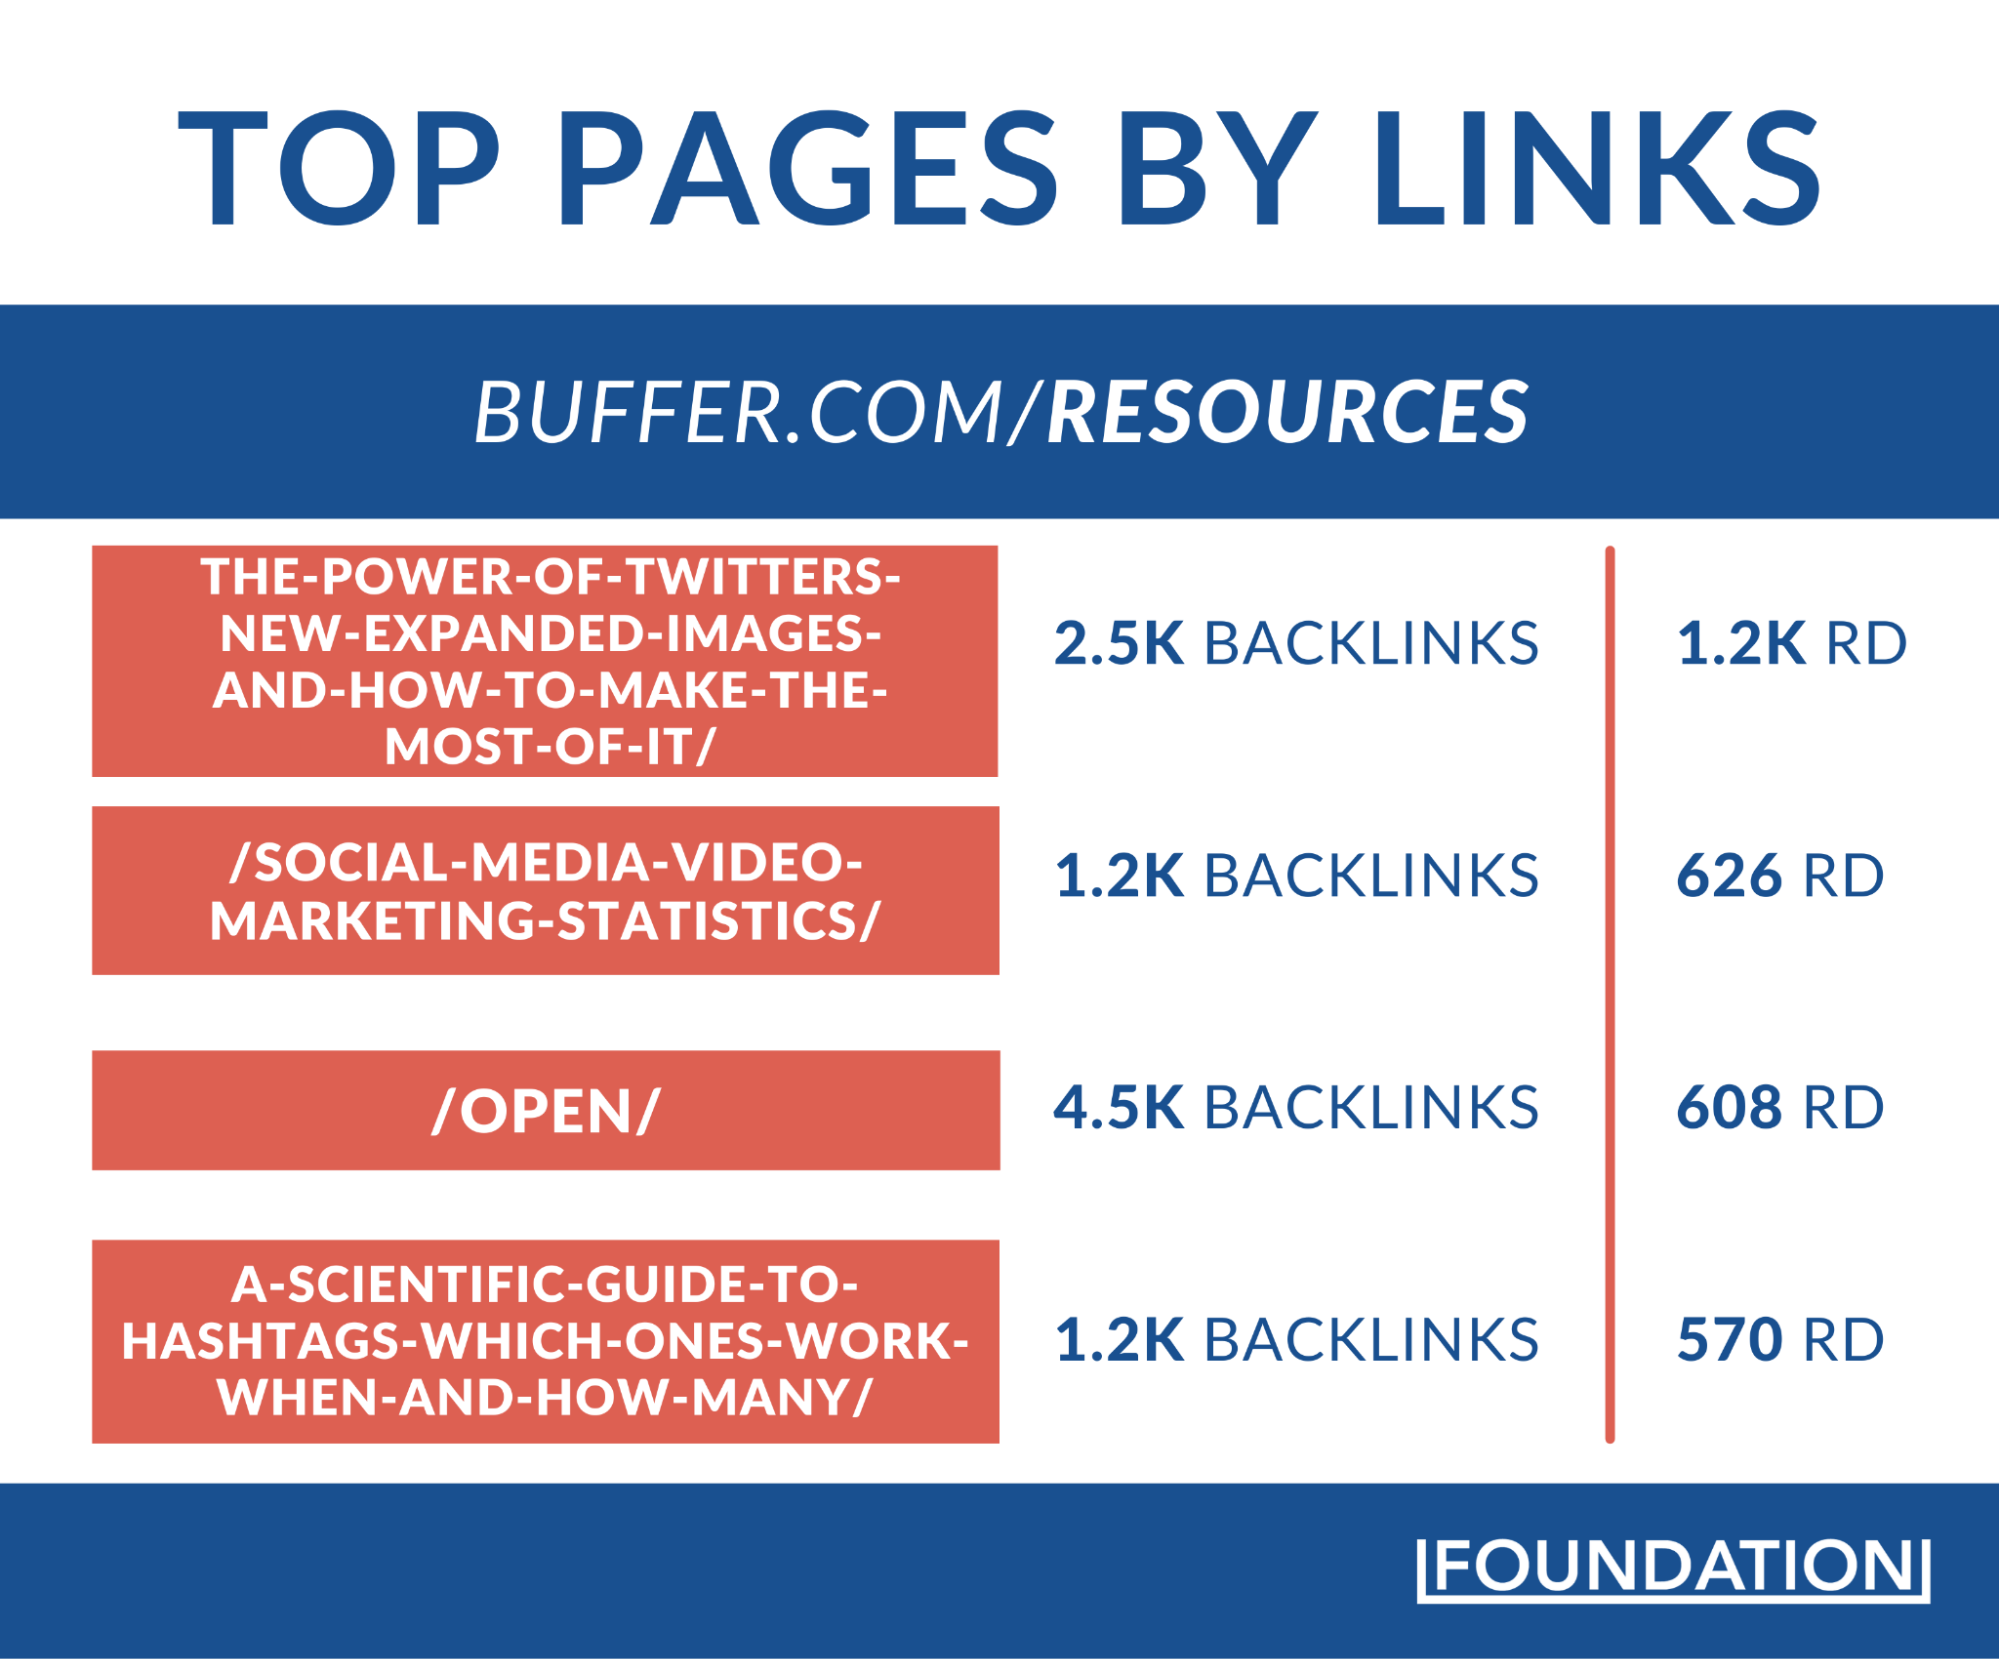 Buffer/resources top pages by link